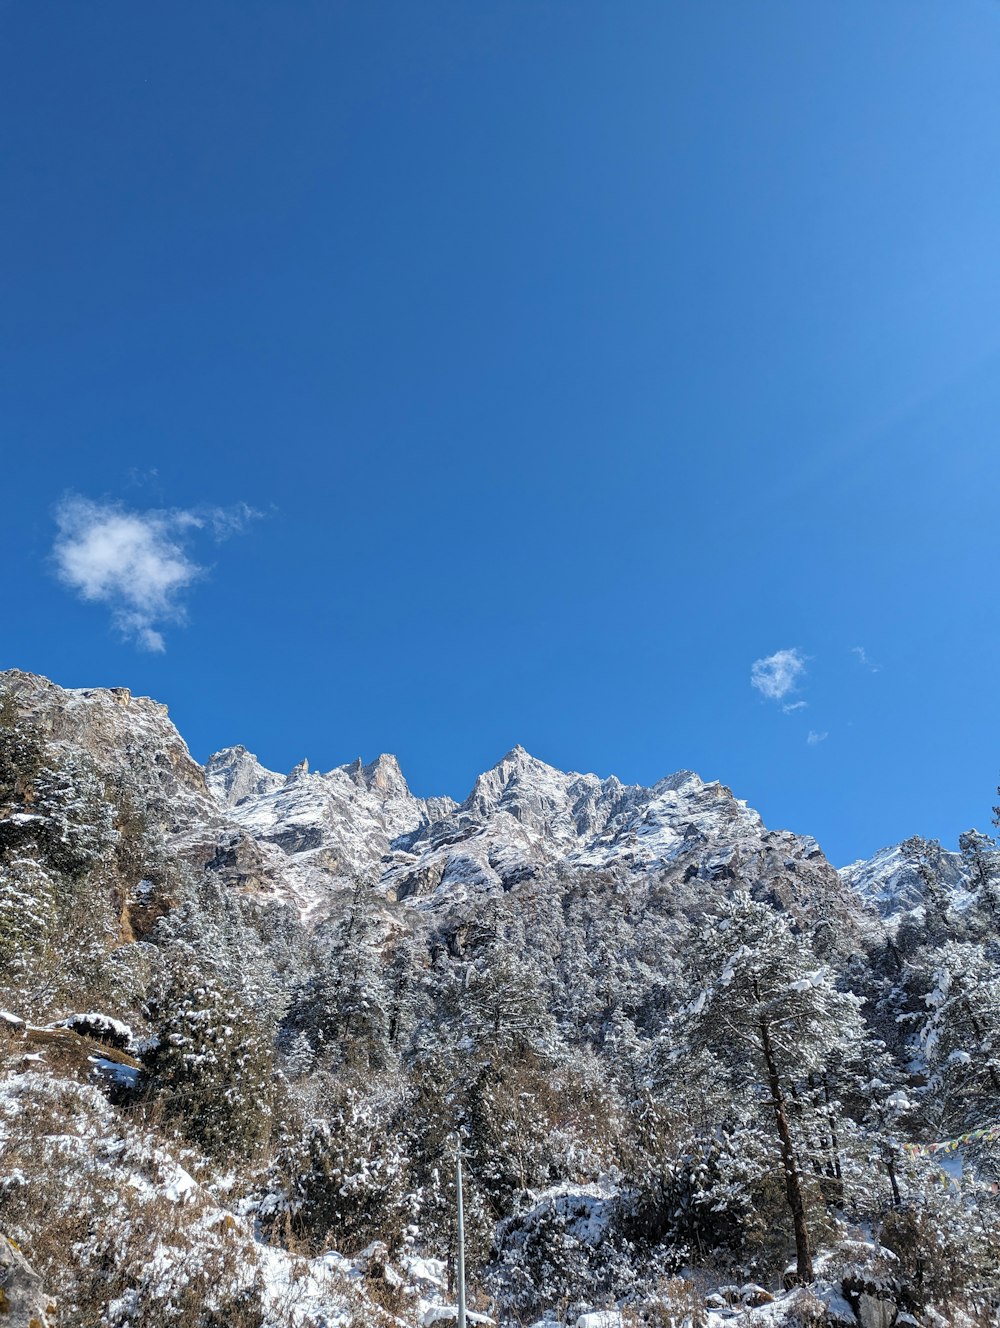 a snow covered mountain with trees and a blue sky